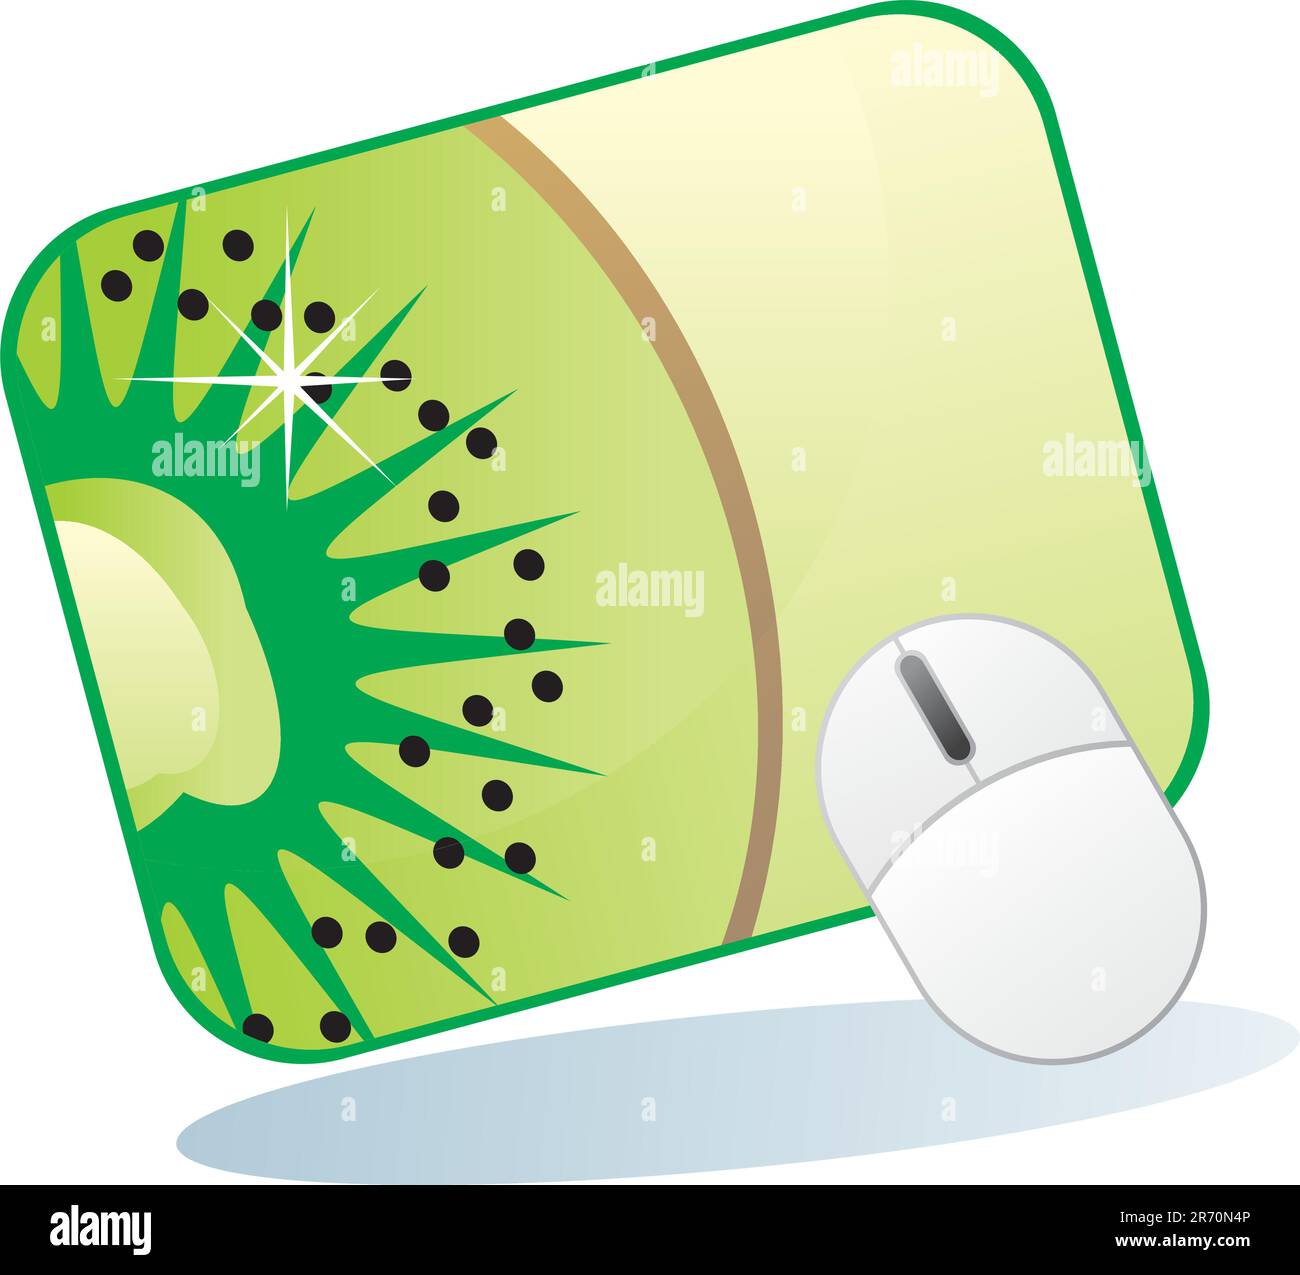 fully editable vector illustration of isolated mousepad Stock Vector